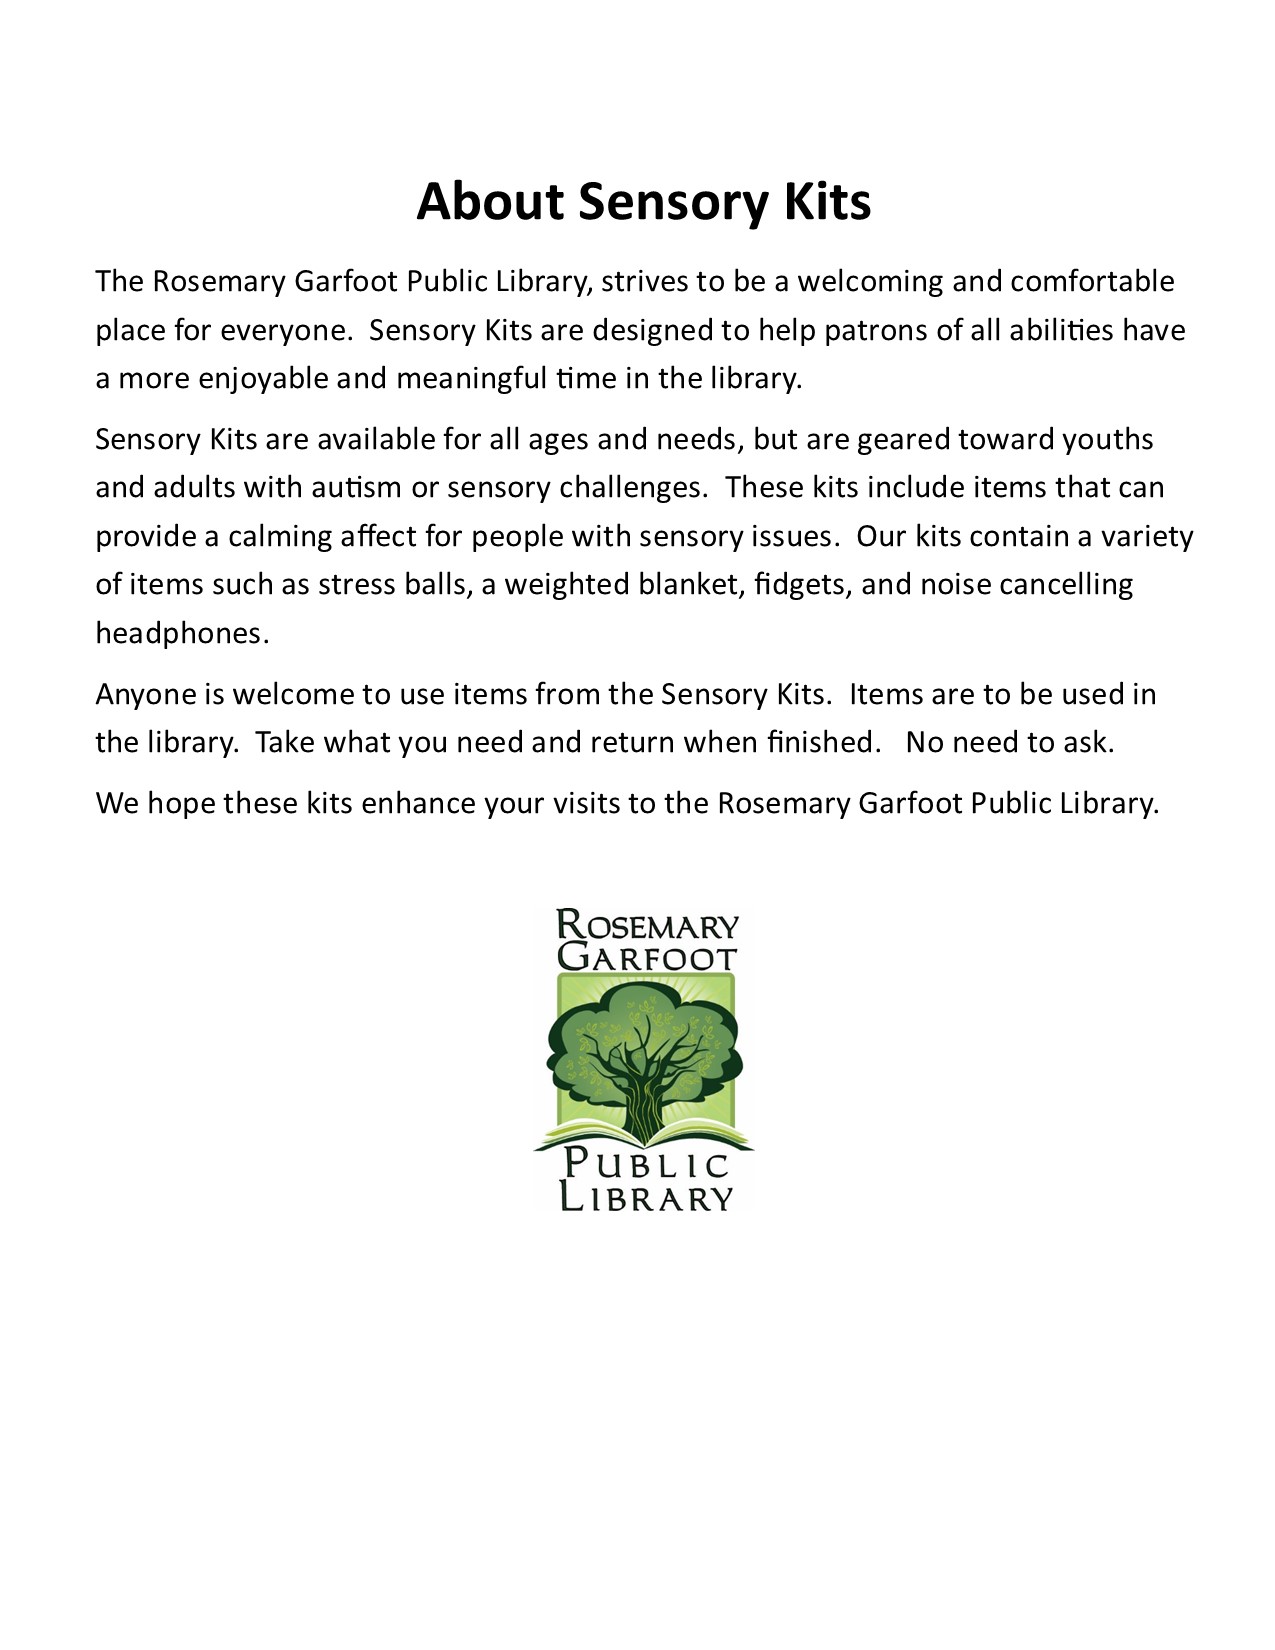 Information about Sensory Kits.  Black and white print on white background.  Library logo at bottom of the page.  Logo is a green tree with a book at the base.